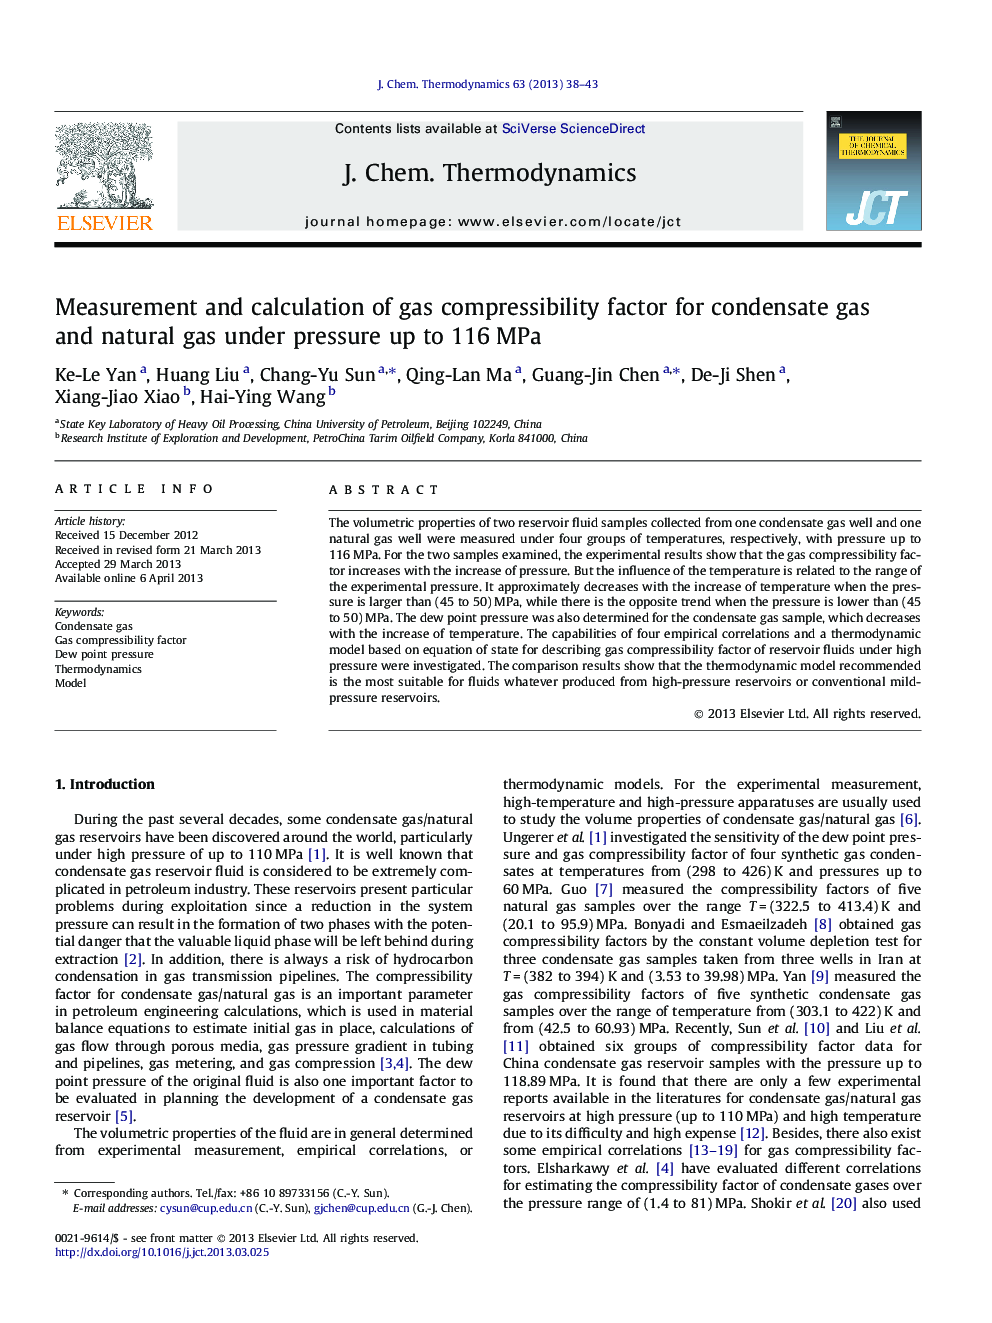 Measurement and calculation of gas compressibility factor for condensate gas and natural gas under pressure up to 116 MPa